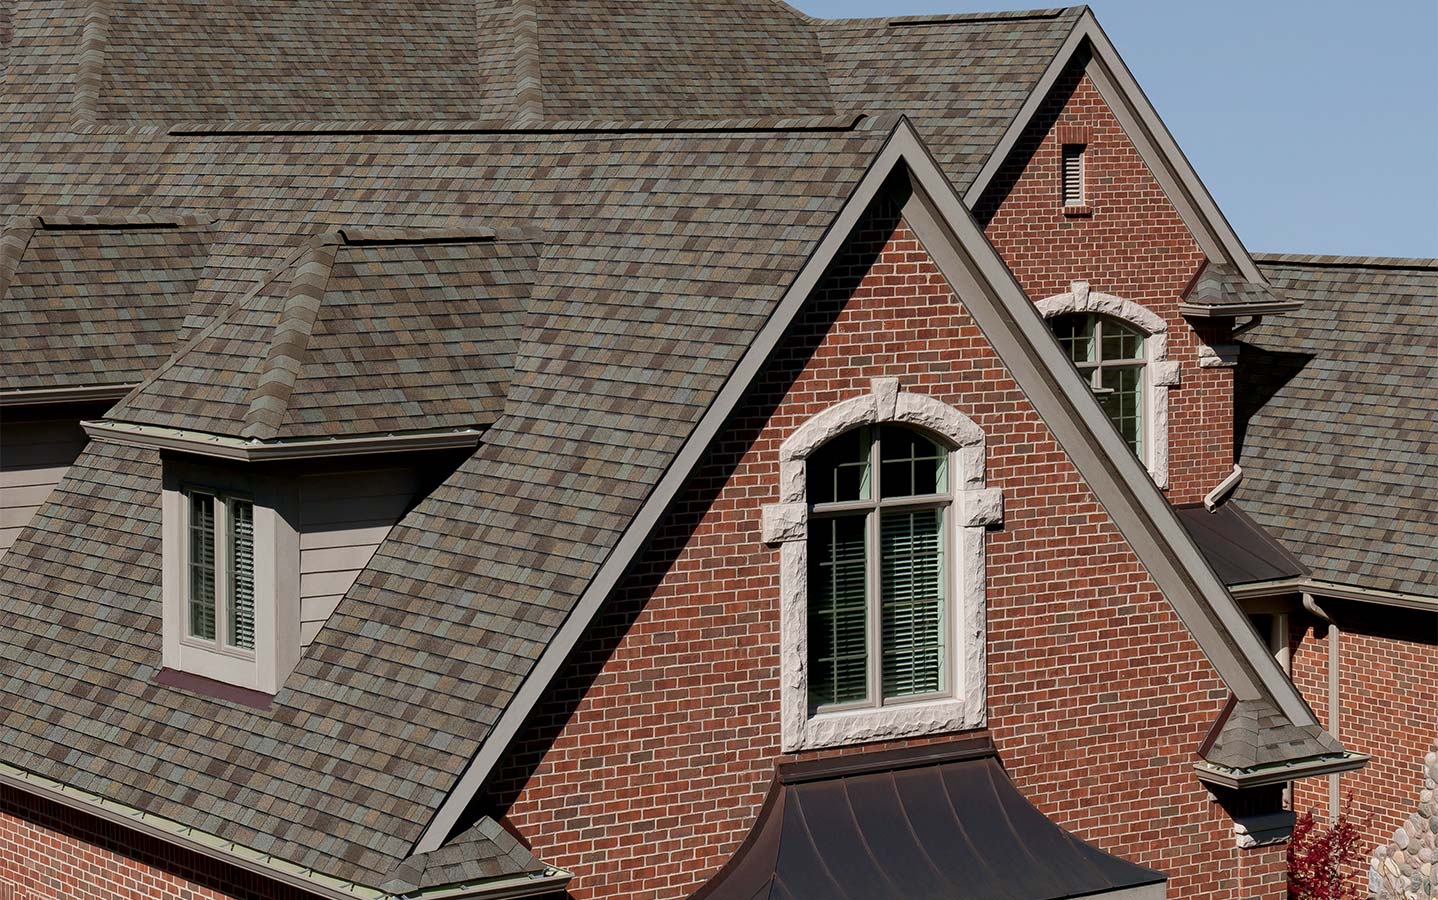 Residential Roofing Shingles on a house